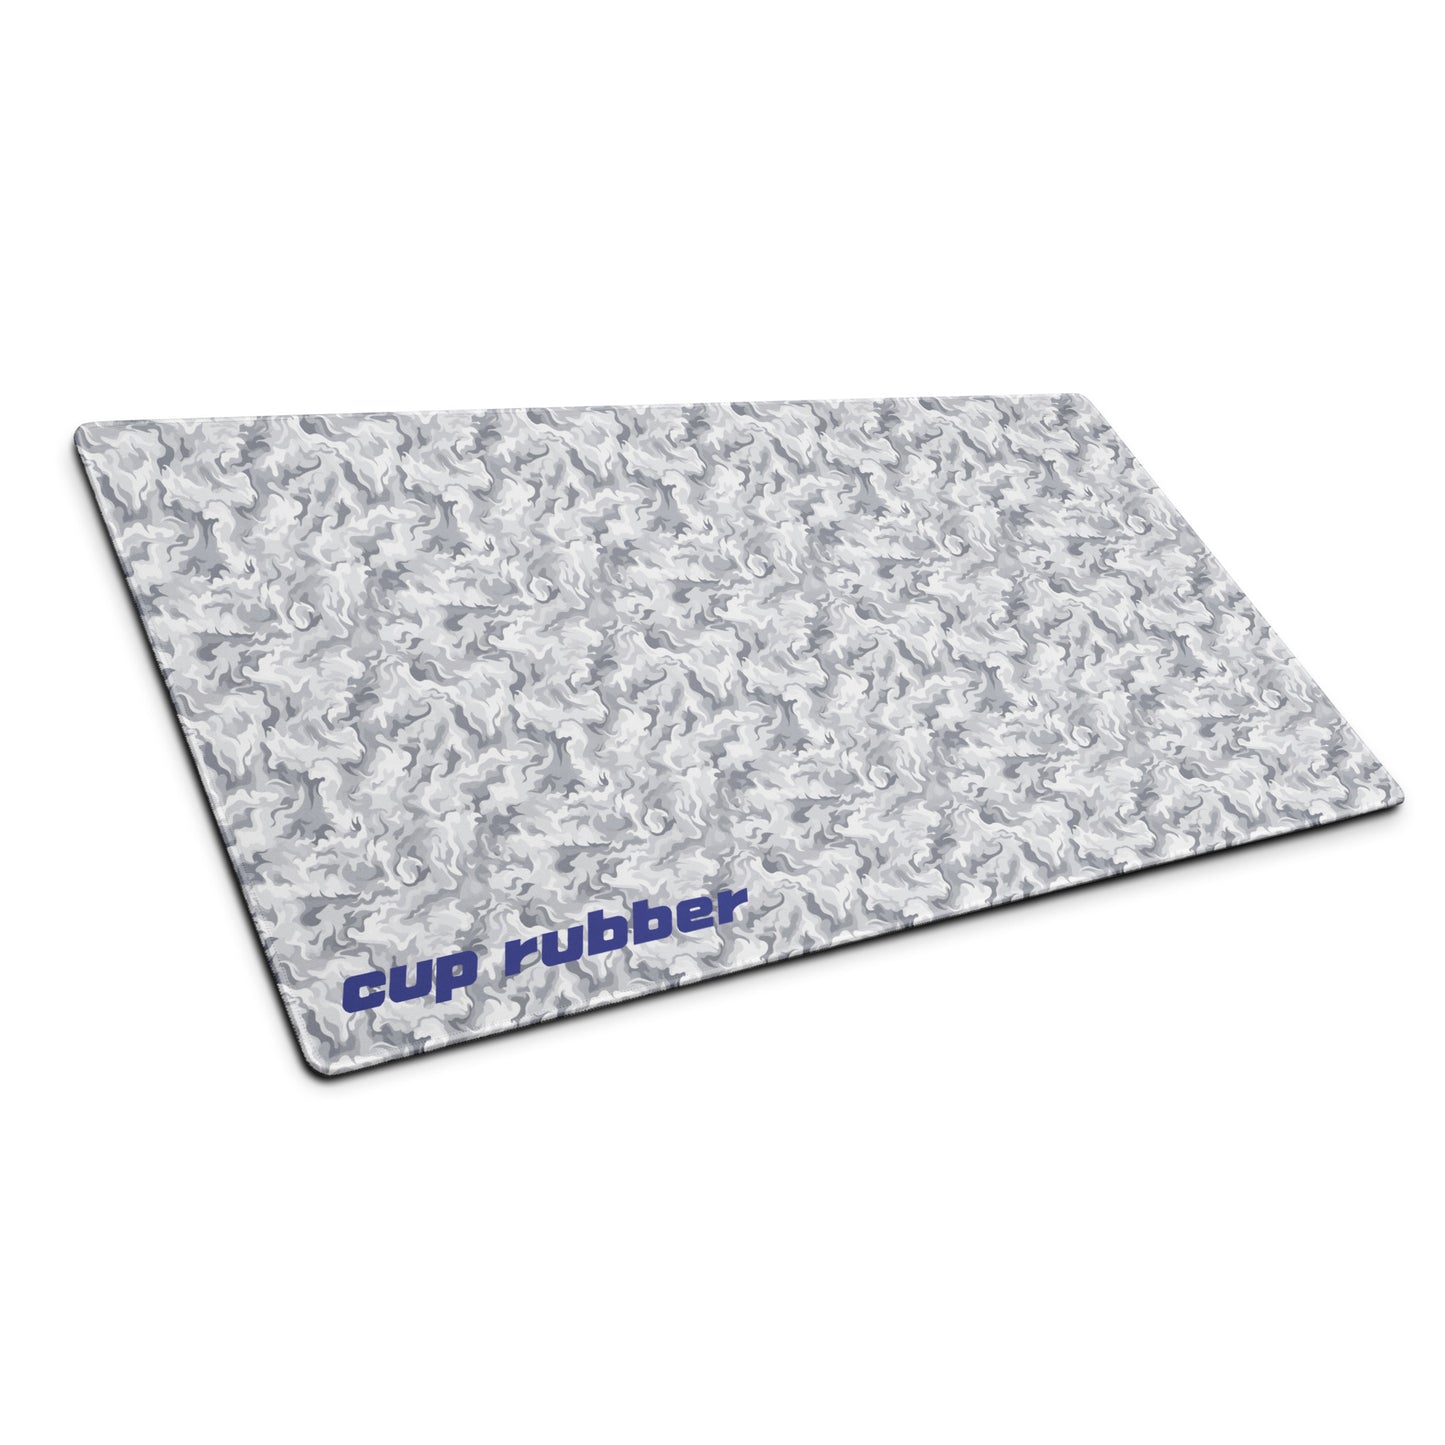 A 36" x 18" desk pad with a camo pattern and the word "Cup Rubber" on it in the bottom left corner shown at an angle. Beige and White in color.